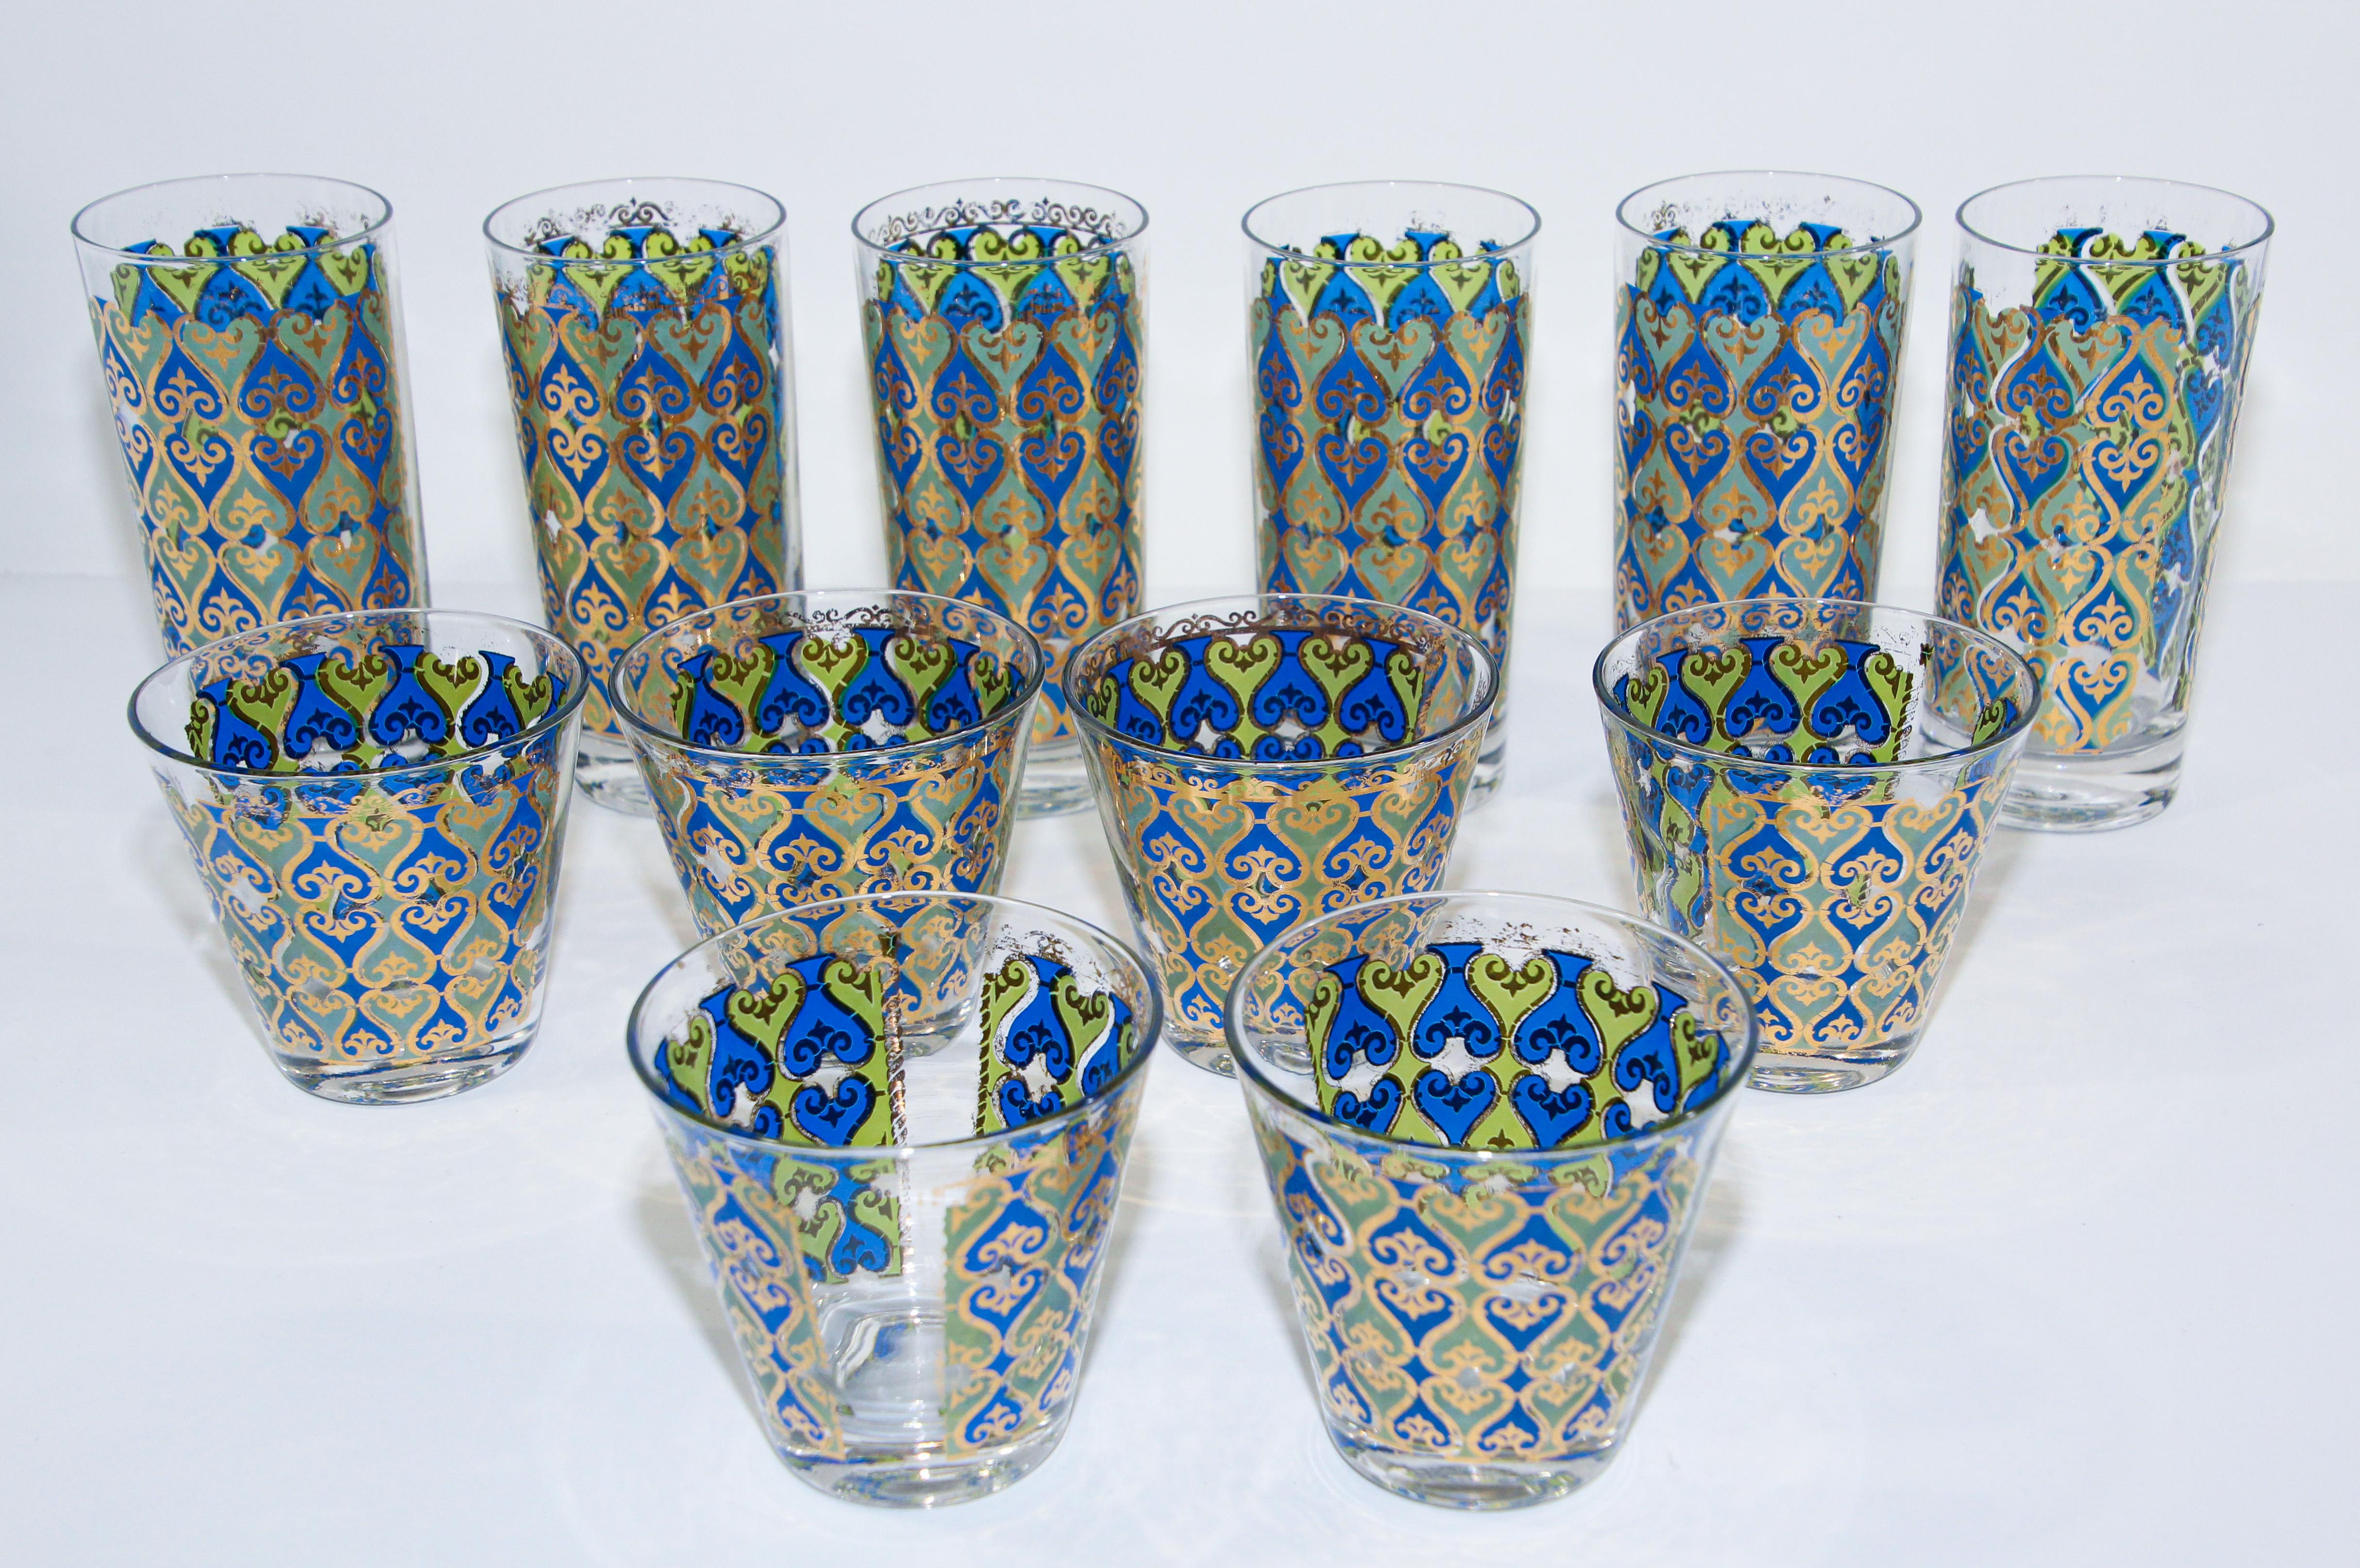 Elegant exquisite vintage set of 12 barware glasses designed by Georges Briard.
The glasses are decorated with gold leaf and Moroccan blue designs.
Vintage condition, with 22-karat gold leaf Moorish design.
Fantastic mid century vintage glasses